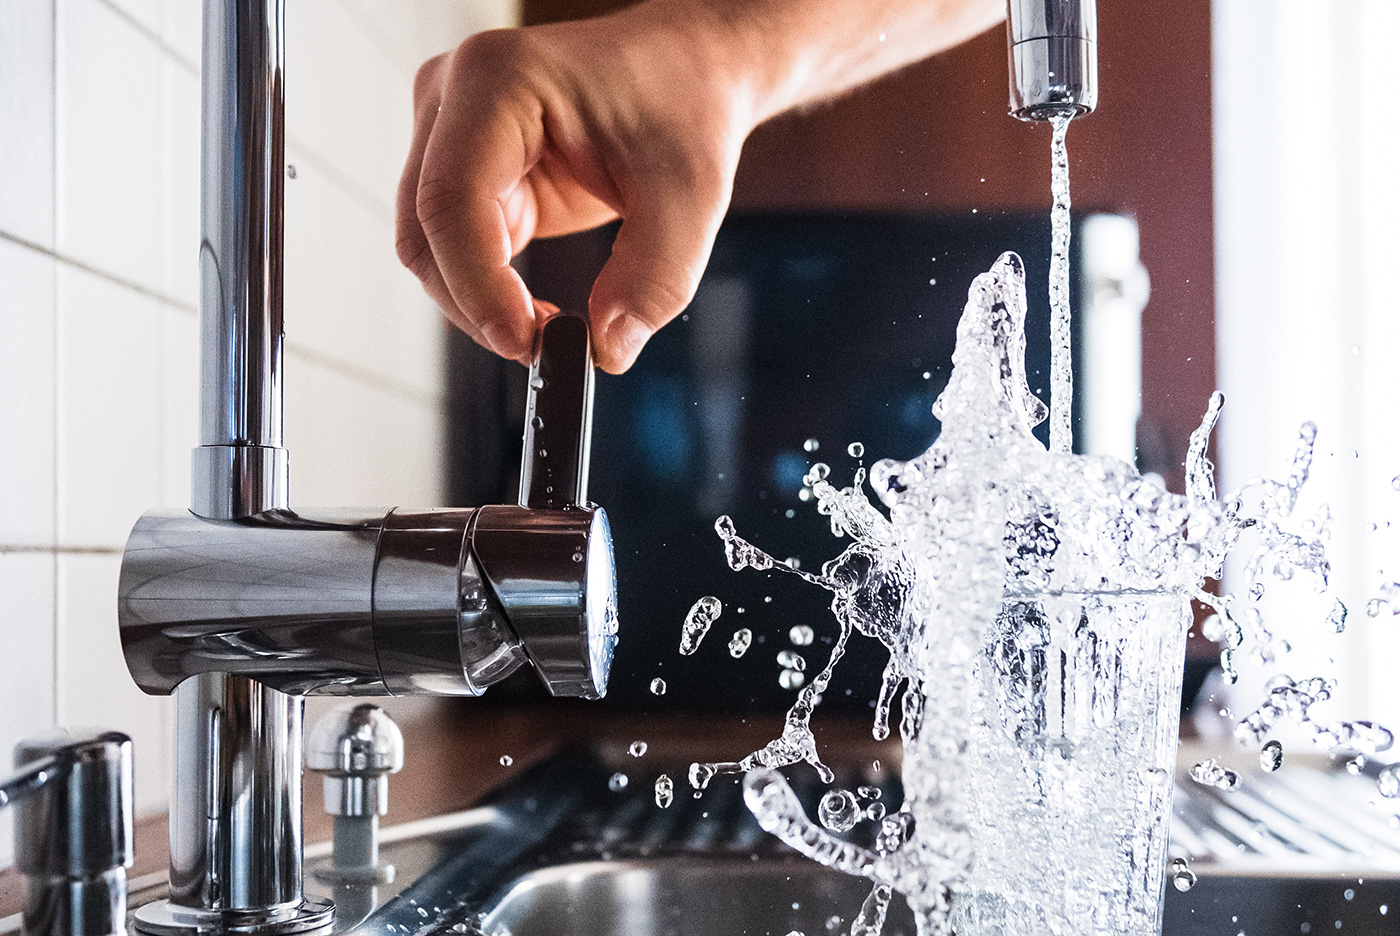 We've researched the best Kitchen Water Filters for your home giving you clean fresh and filtered water.